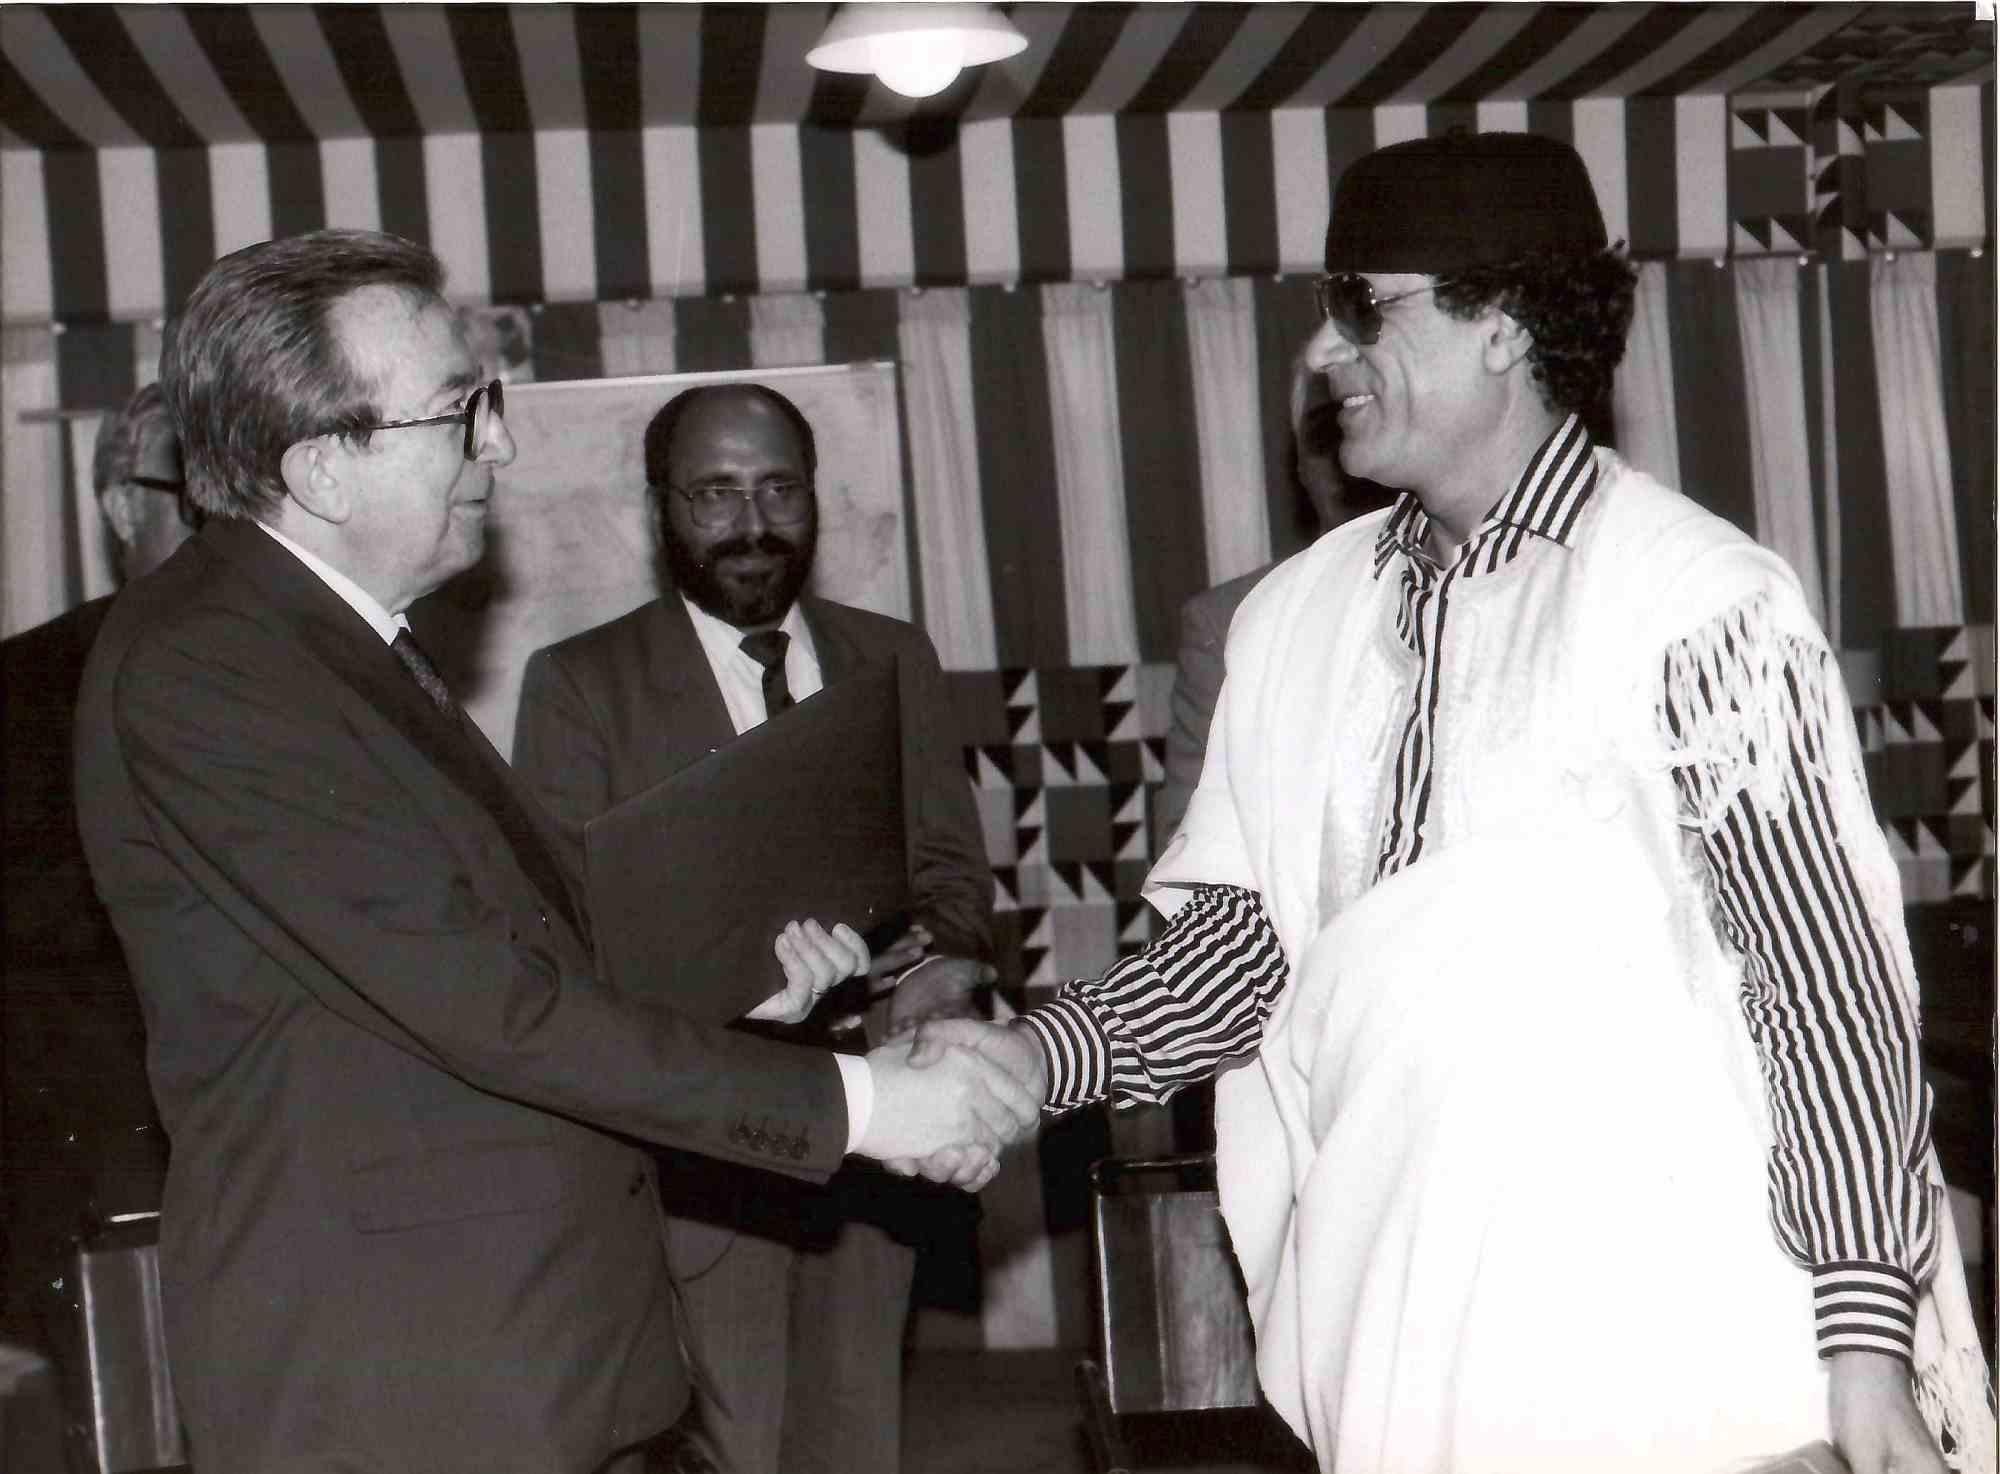 Unknown Black and White Photograph - Giulio Andreotti and Gaddafi's - Vintage B/W Photograph - 1970s